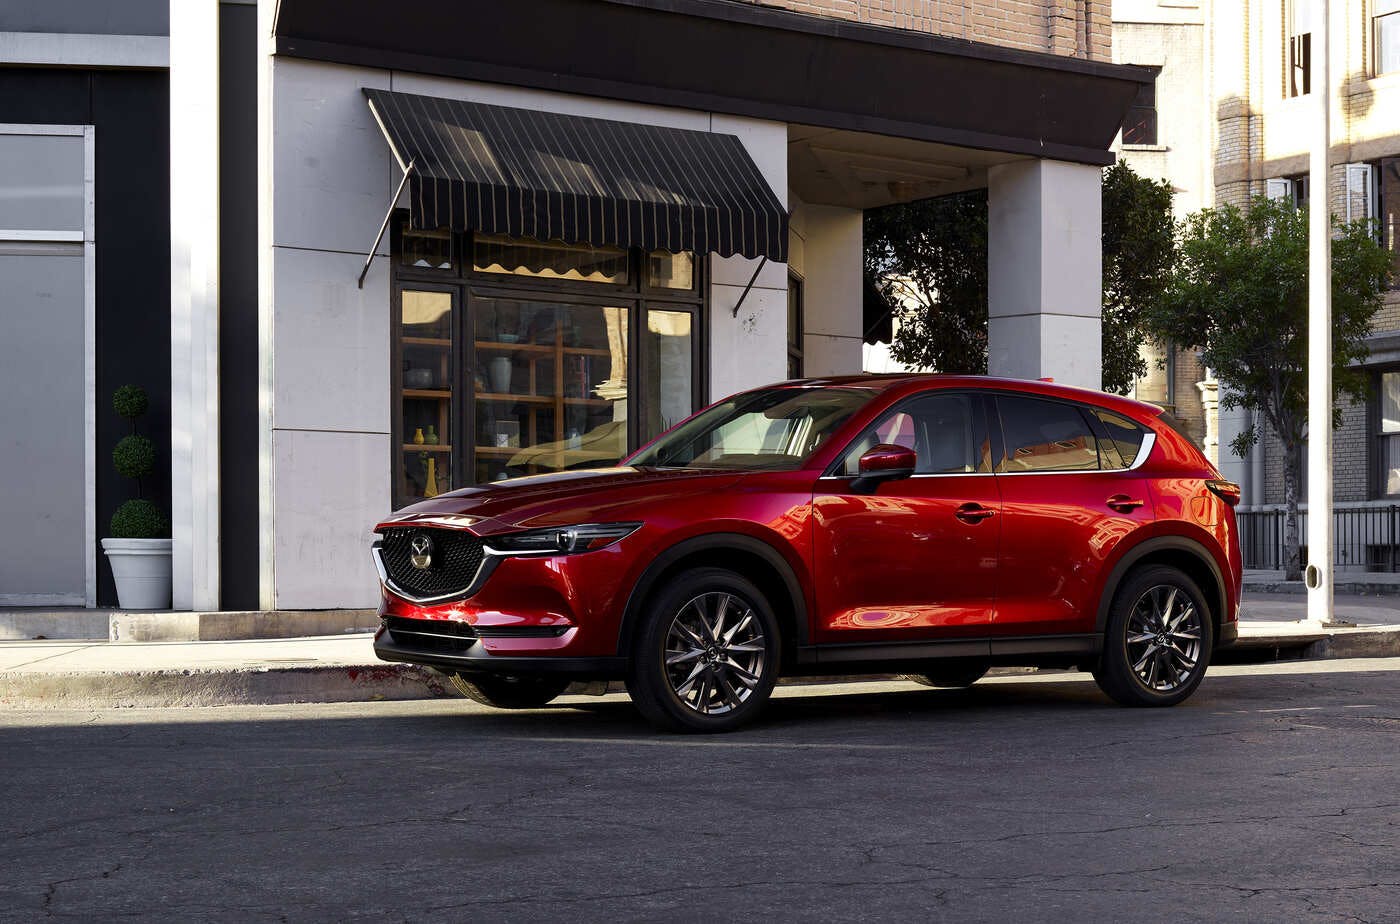 2023 Mazda CX-5 Lease Deals and Prices - Page 22 — Car Forums at Edmunds.com